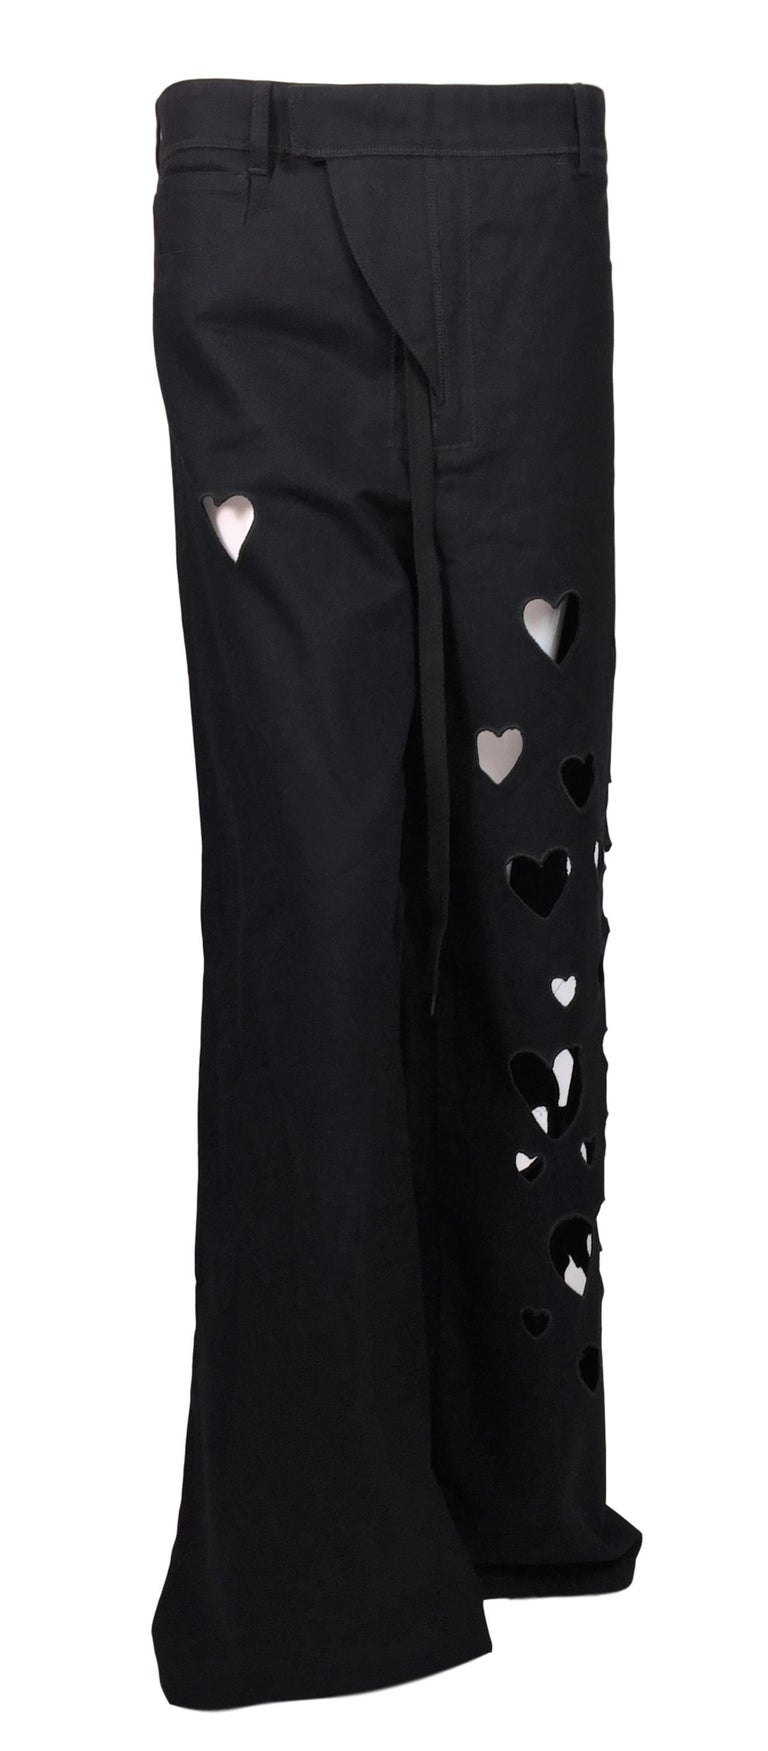 S/S 2002 Gucci by Tom Ford Runway Black Baggy Hip Hop Heart Cut-Out Jeans at 1stdibs